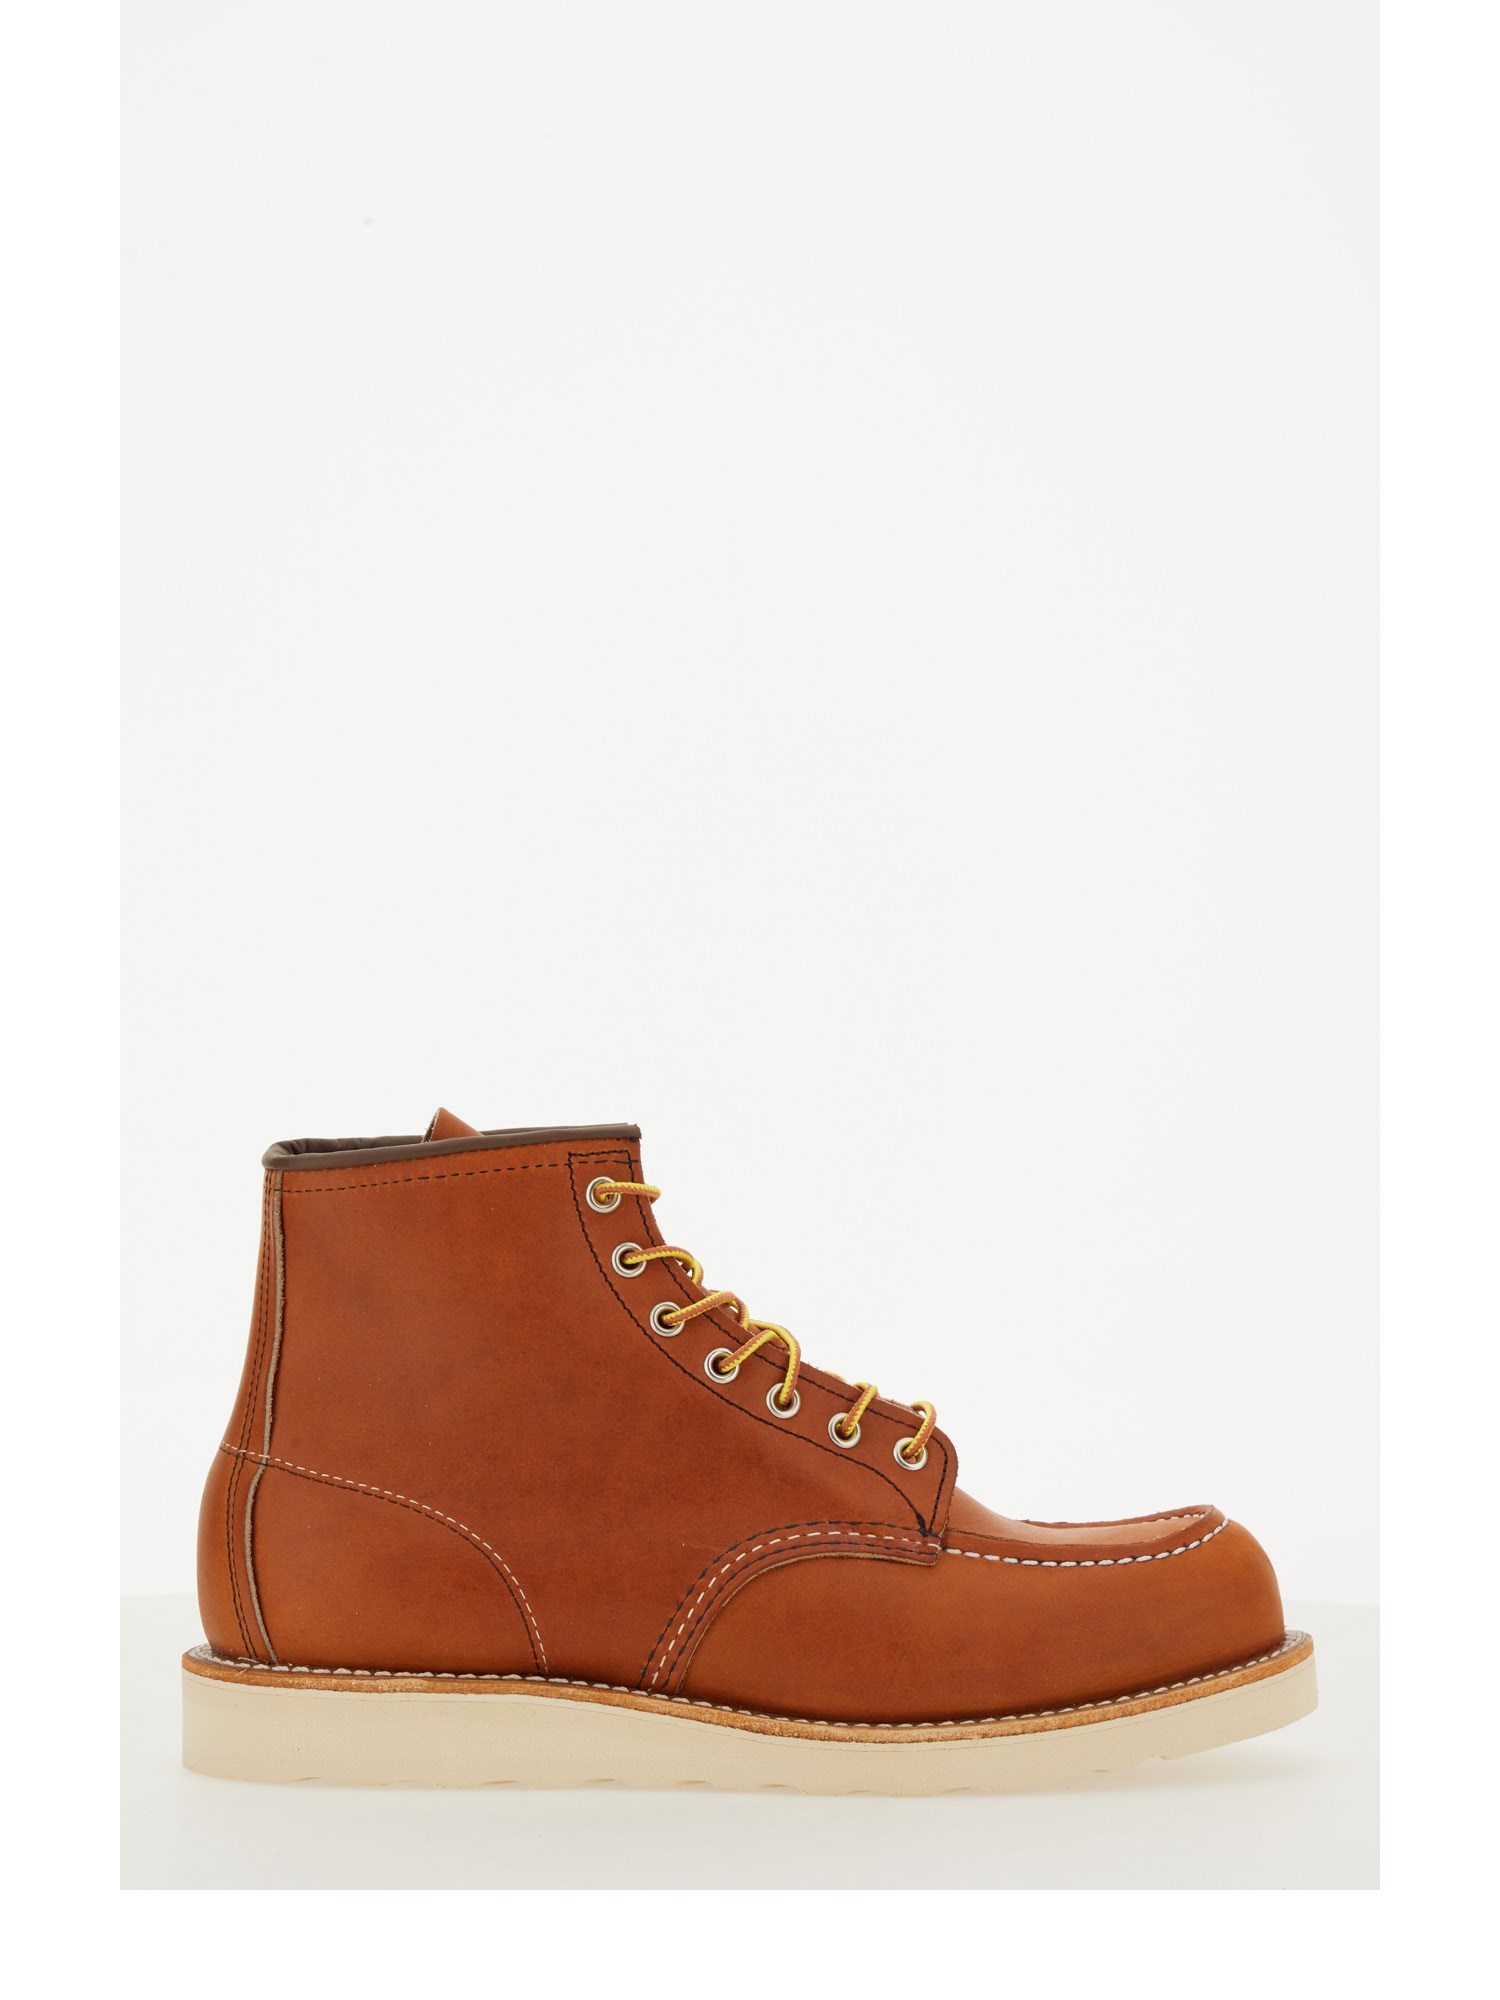 red wing red wing moc boot